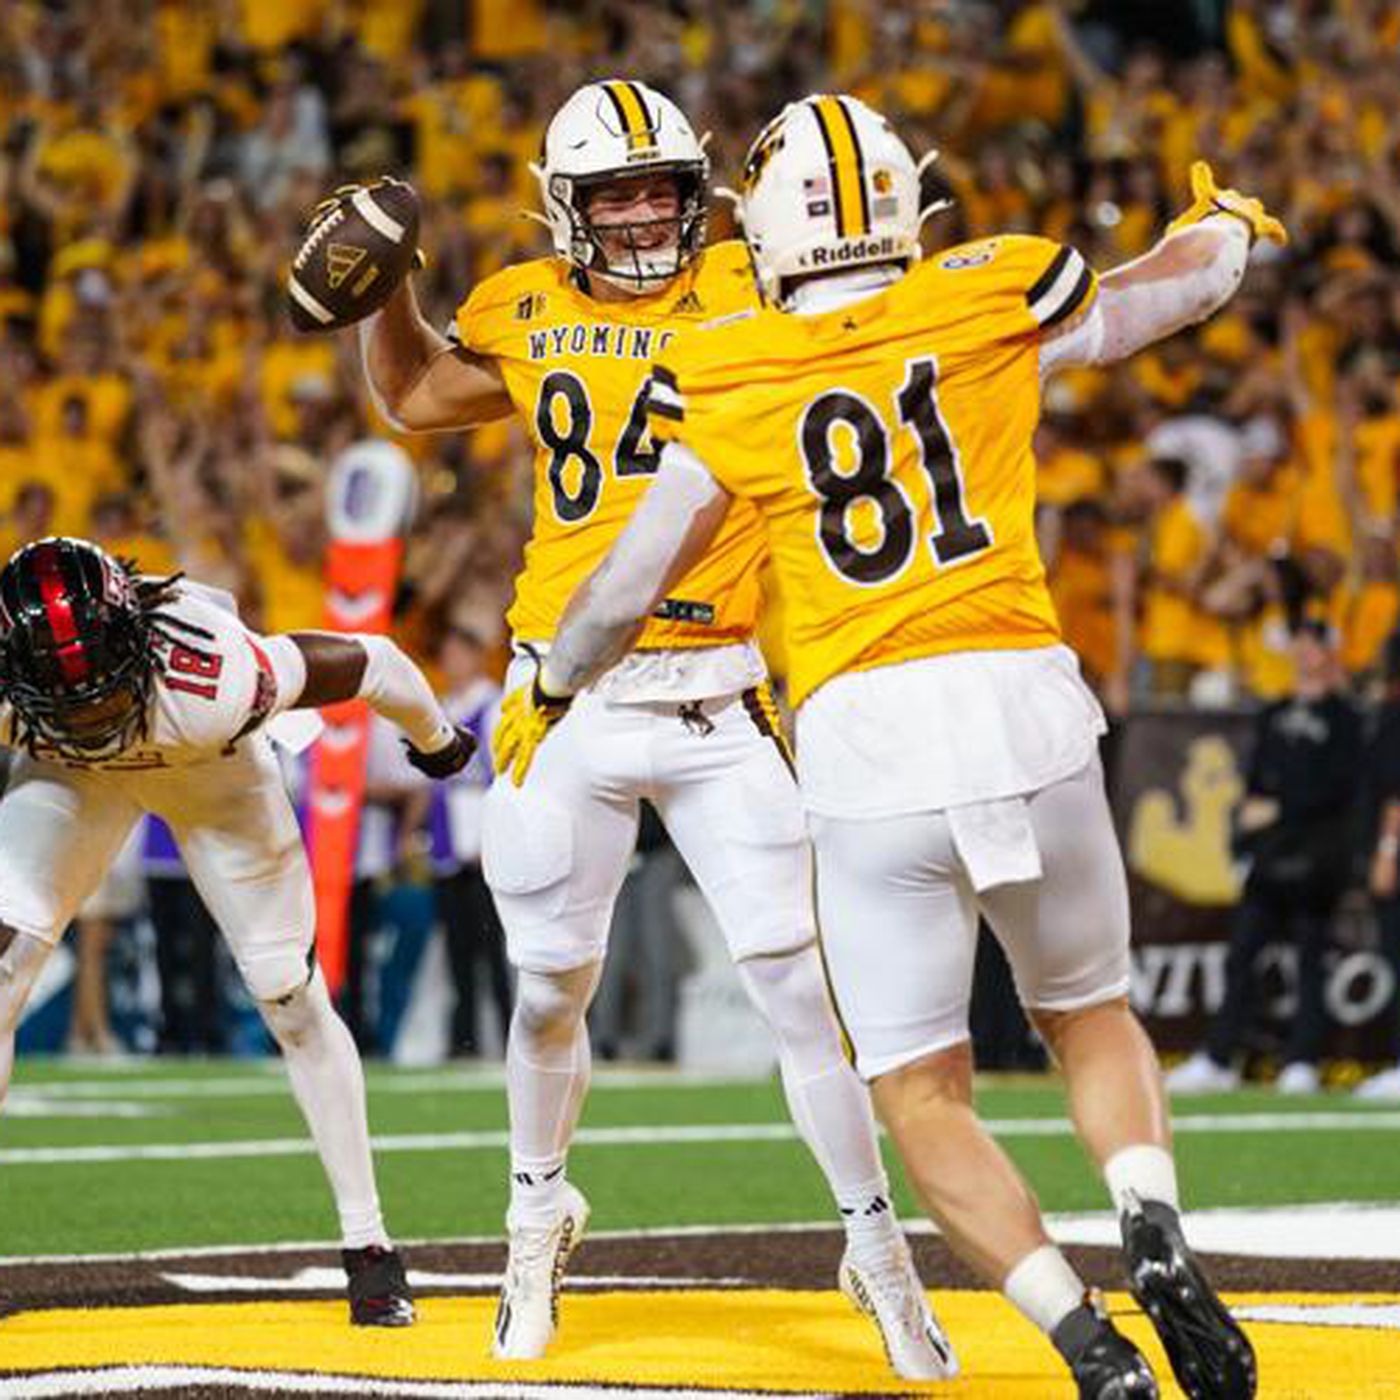 How to Watch the Wyoming vs. Texas Tech Game: Streaming & TV Info